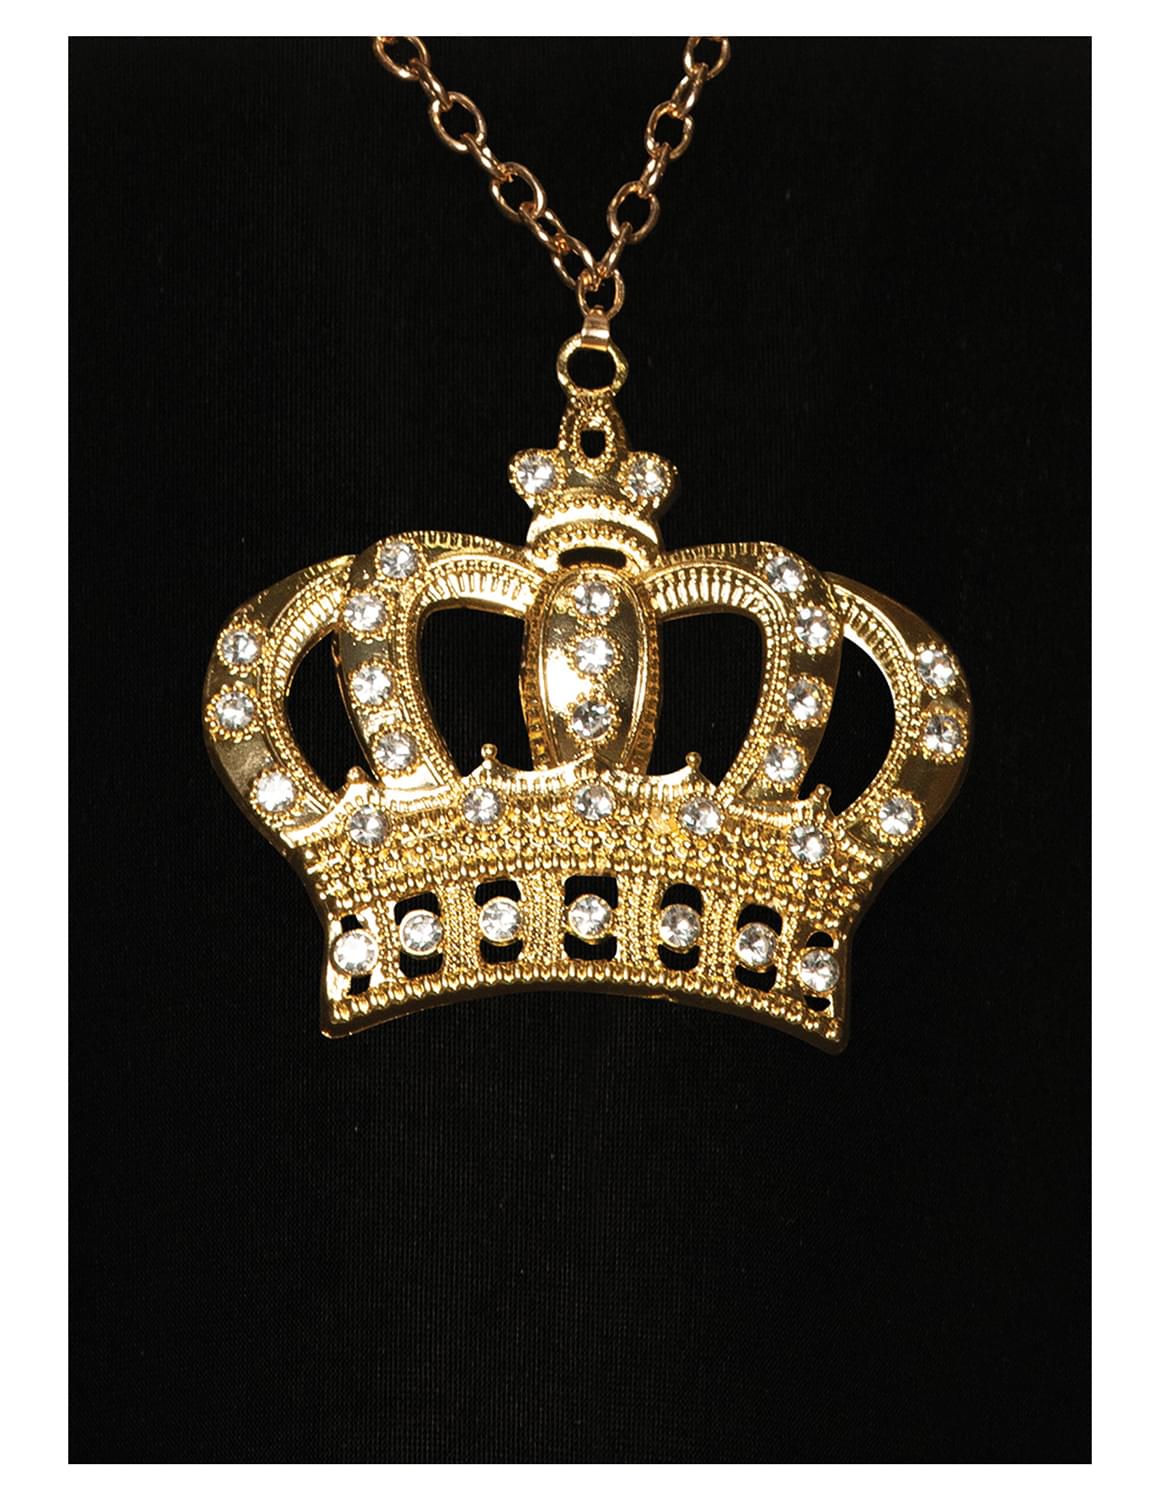 Gold Crown Necklace Costume Jewelry